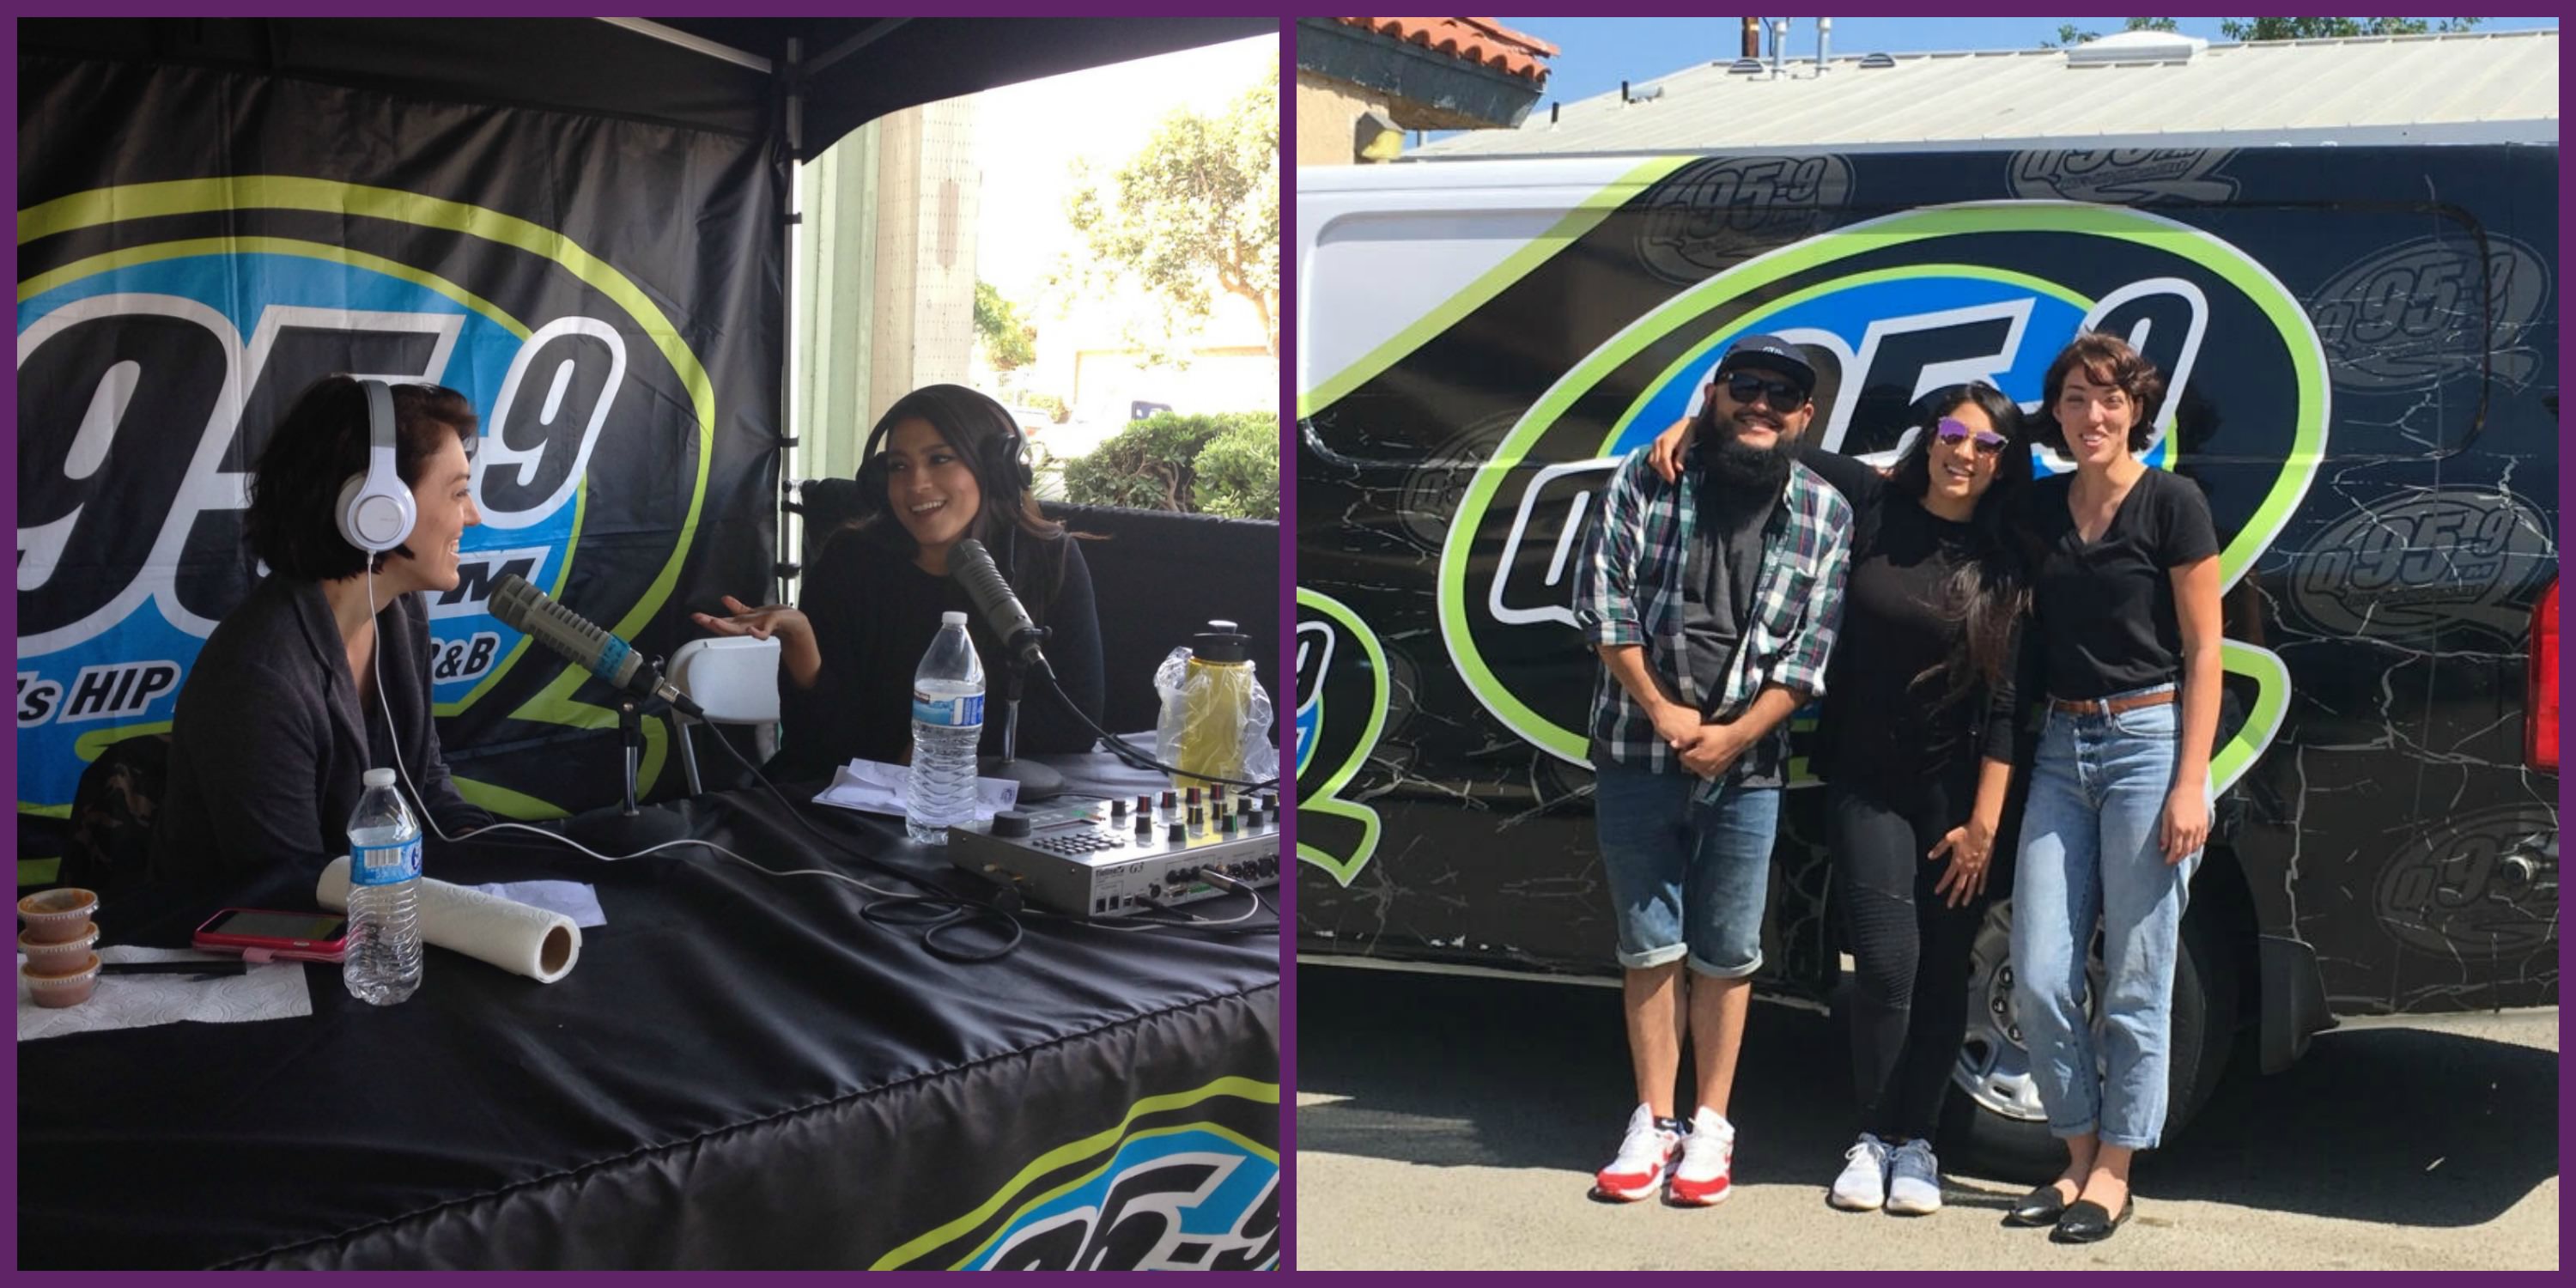 Q95.9 FM Radio Station – Back to School Drive for Homeless Students